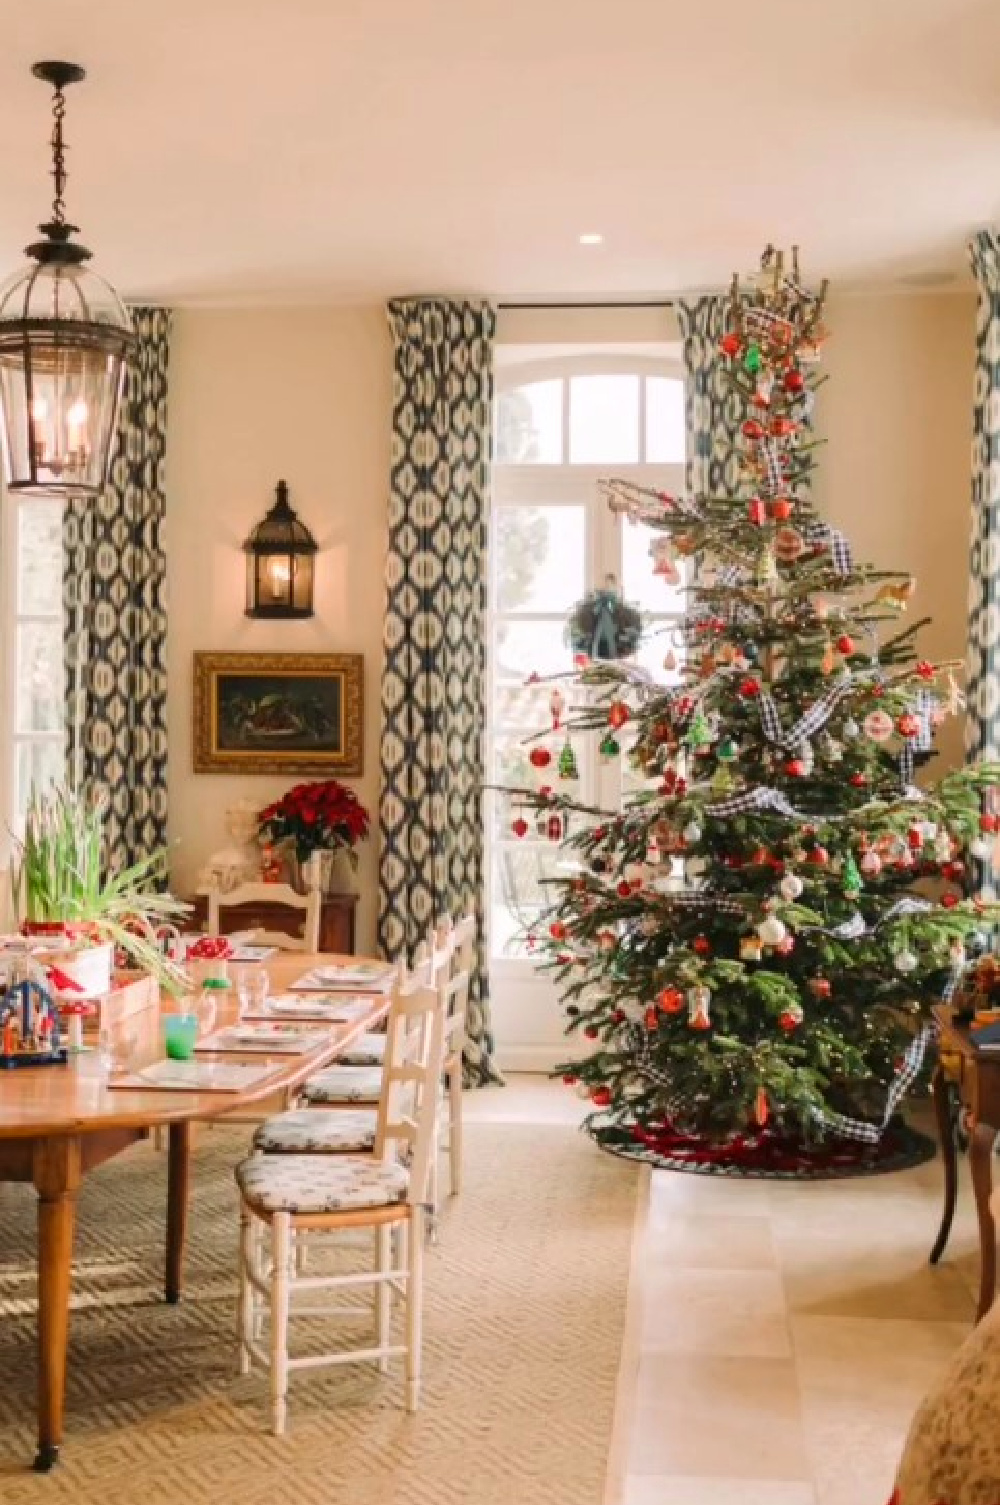 @provencepoiriers - Christmas tree in  dining room in a French farmhouse in Provence. #provencechristmas #frenchchristmas